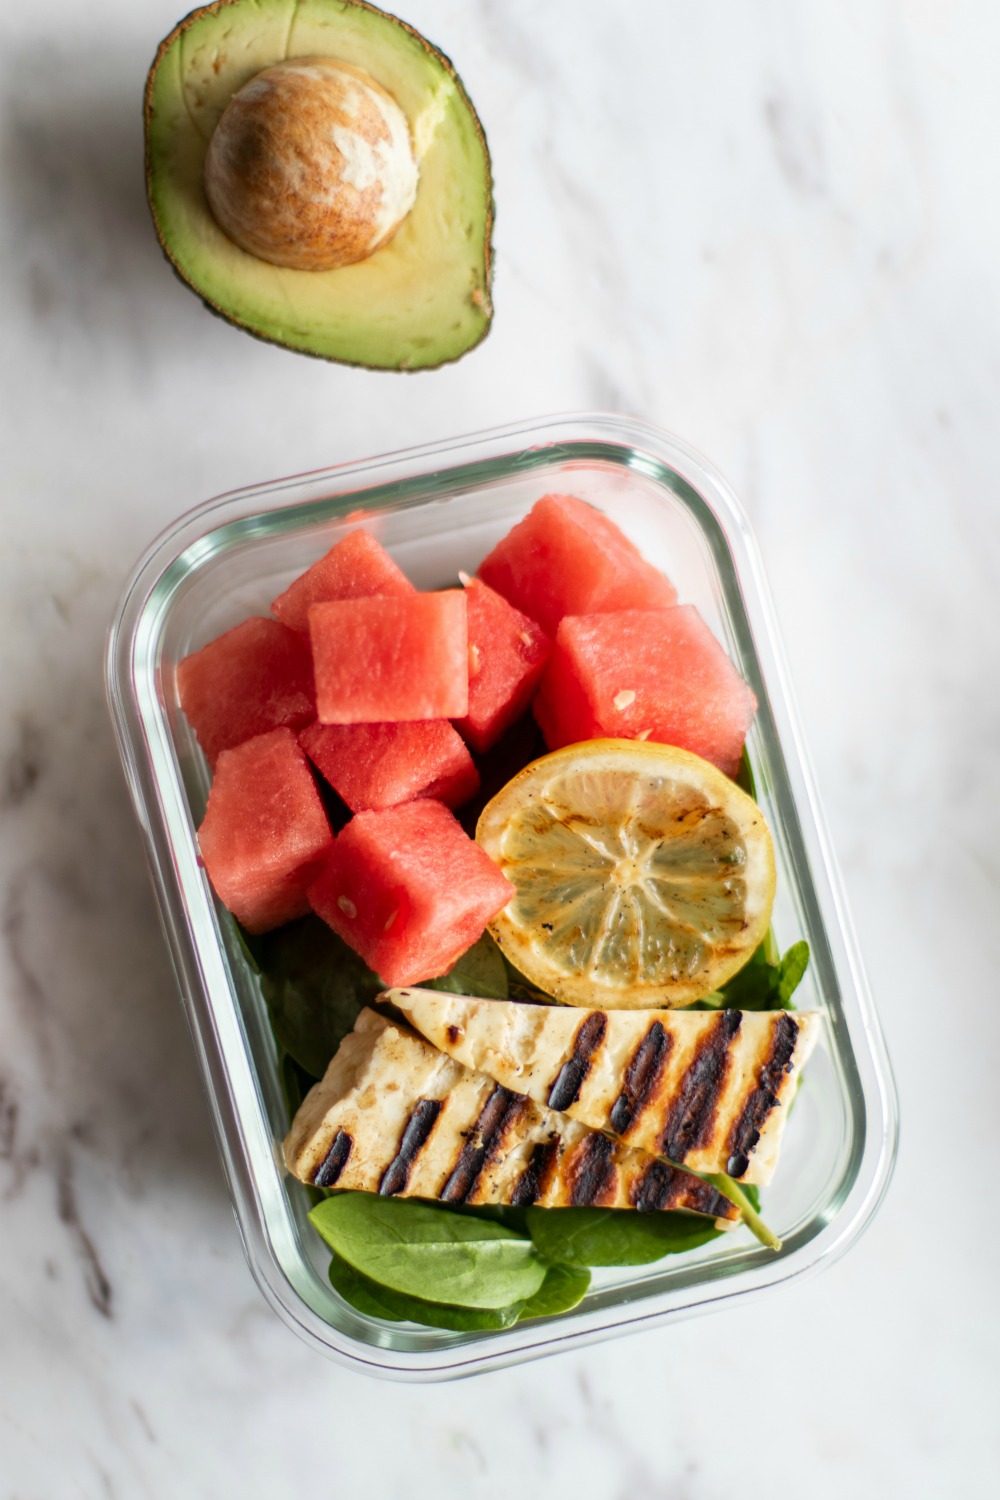 Grilled Halloumi and Watermelon Salad